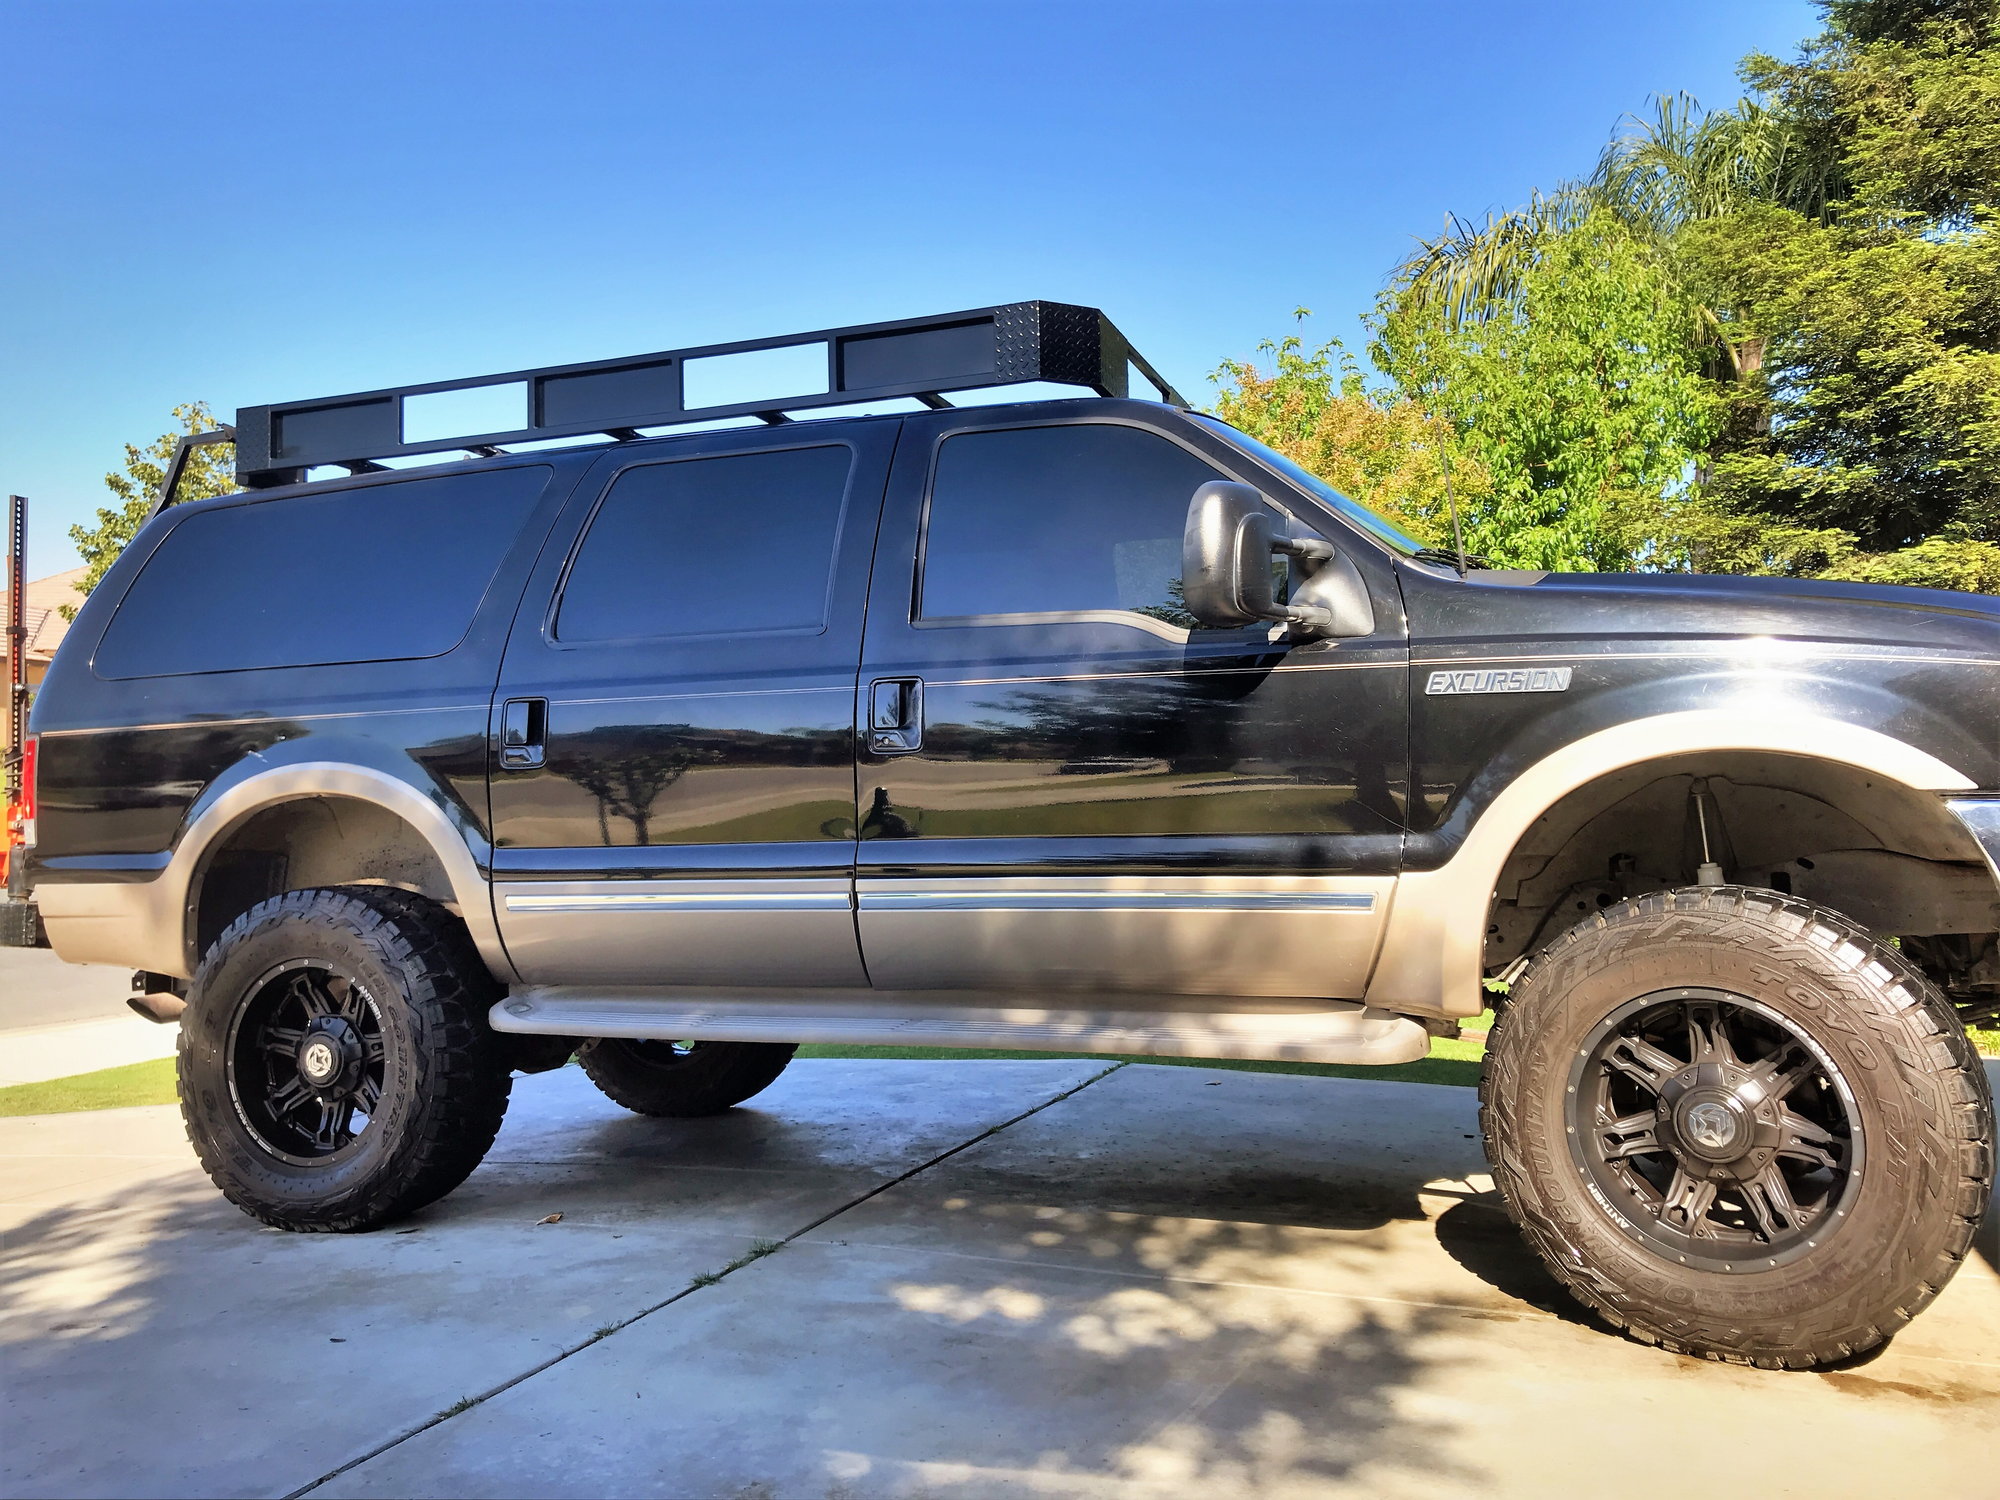 2002 Ford Excursion - 2002 Ford Excursion Diesel 4x4 /w 7.3 and great overland build offroad - Used - VIN 1FMSU43F92EB65812 - 300,000 Miles - 8 cyl - 4WD - Automatic - SUV - Black - Bakersfield, CA 93311, United States